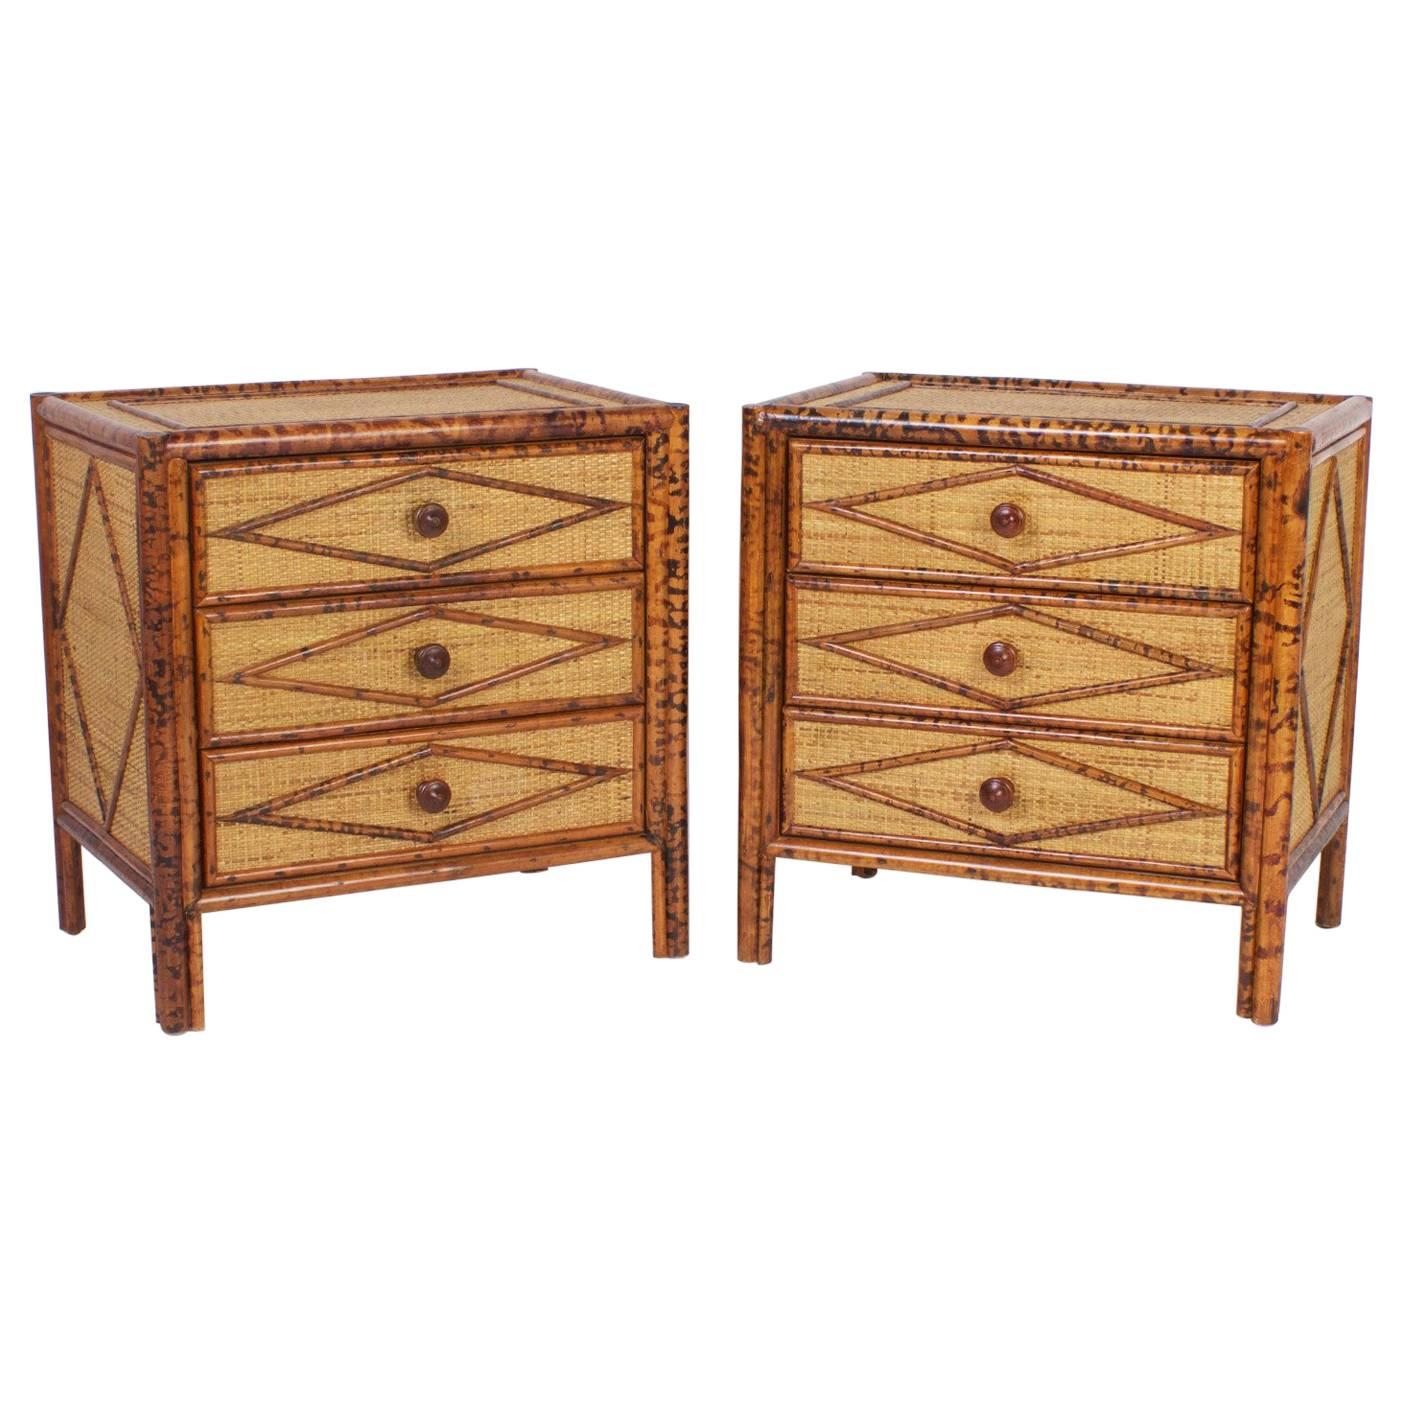 Pair of Three-Drawer Faux Bamboo Nightstands